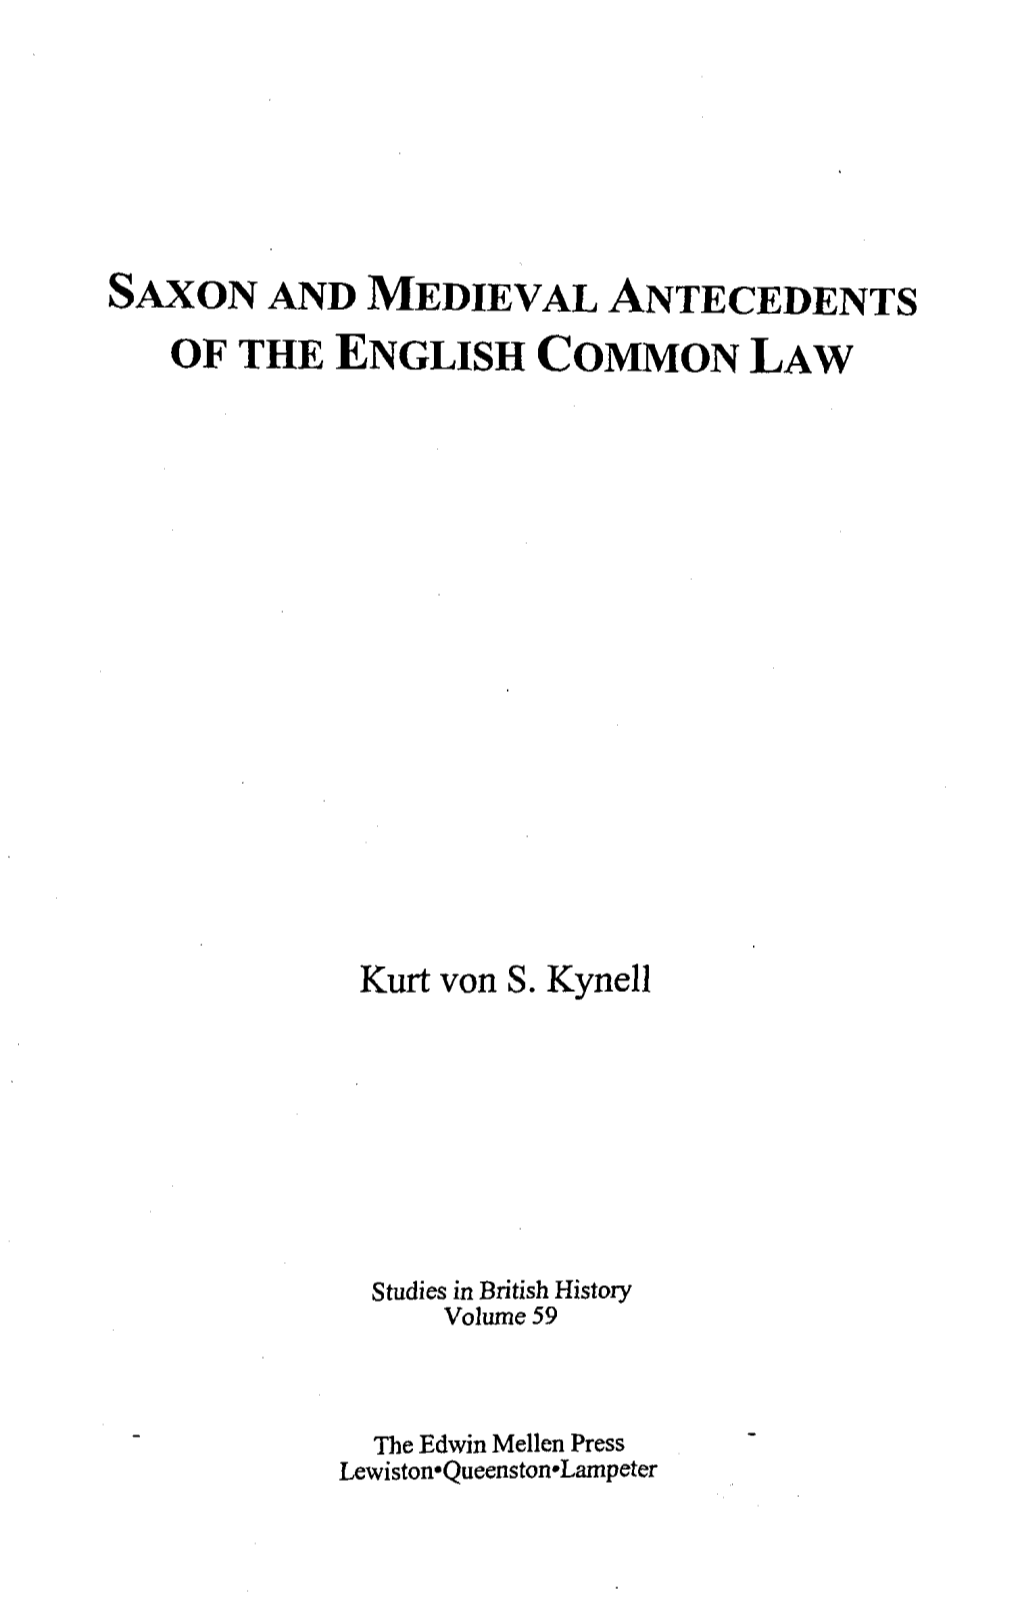 Saxon and Medieval Antecedents of the English Common Law